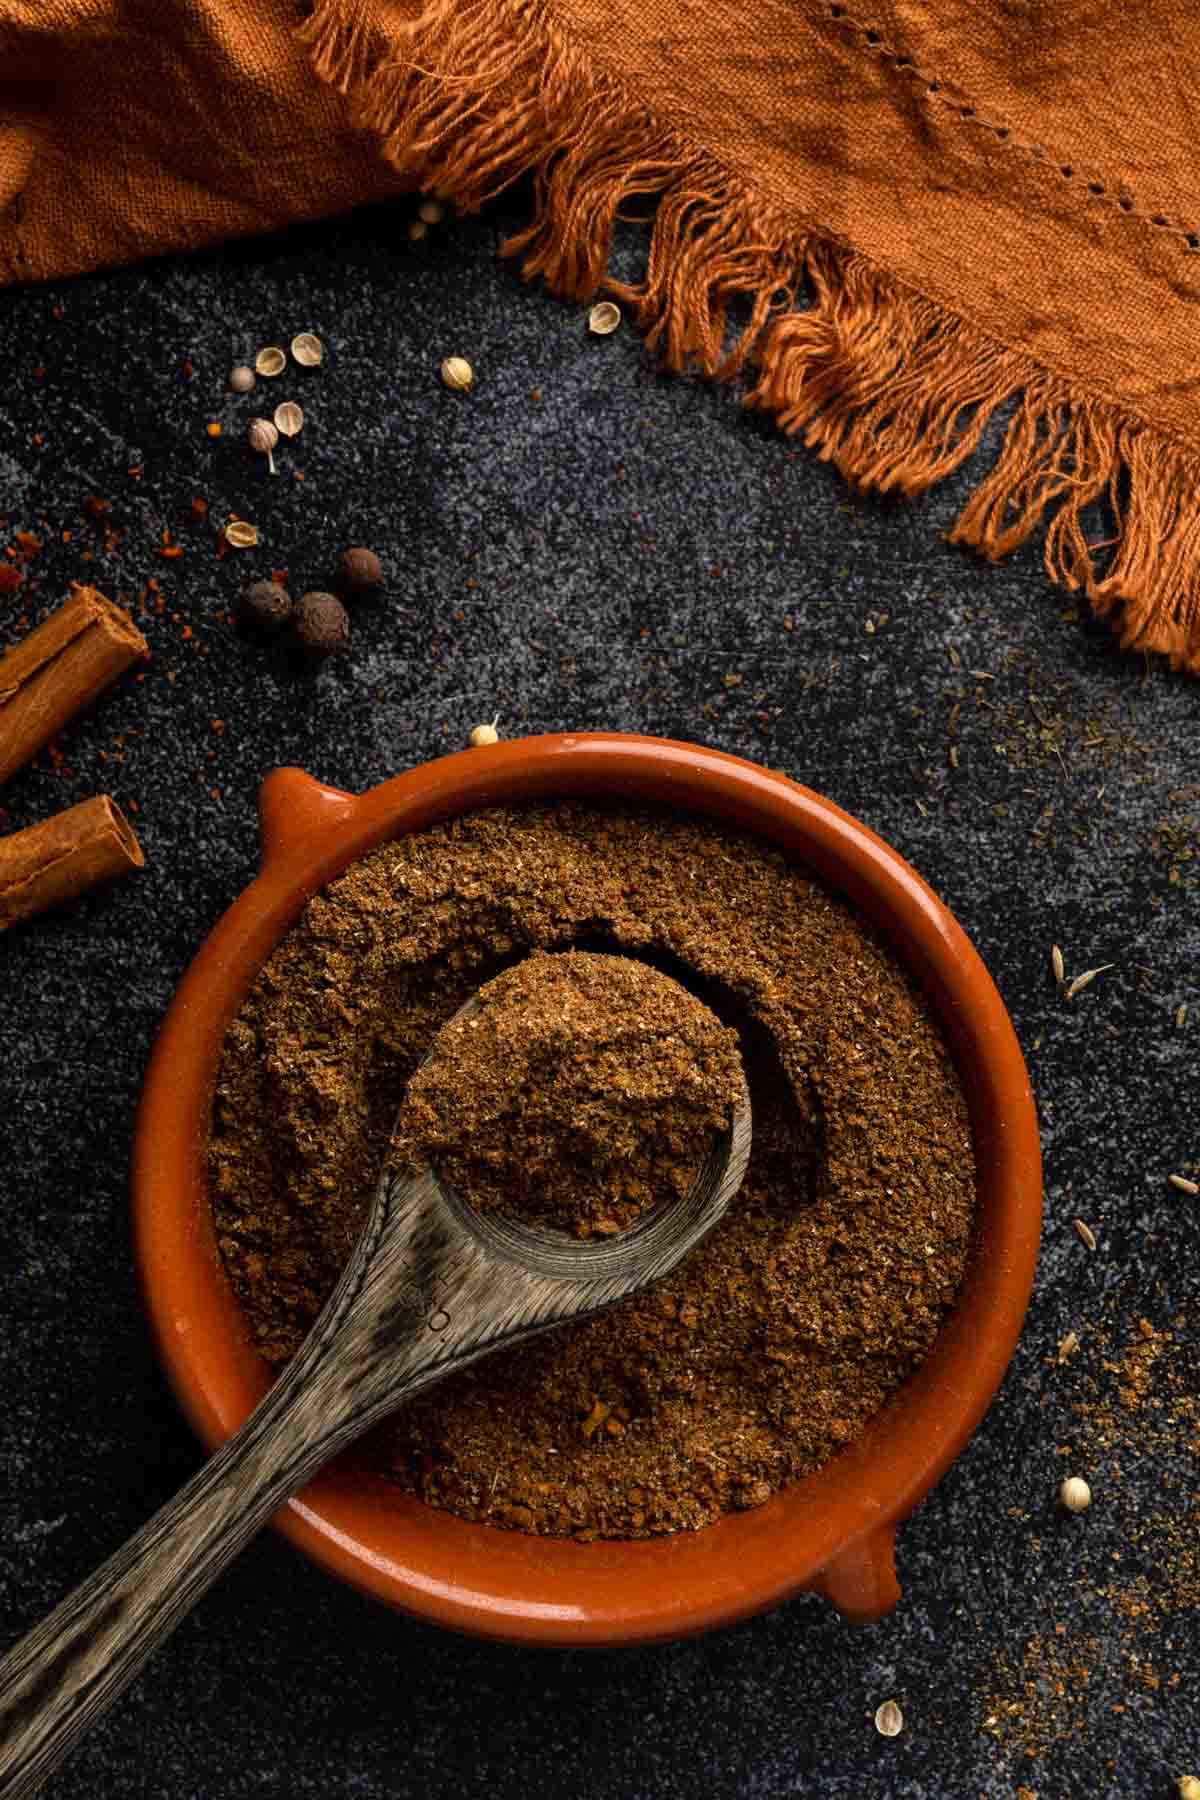 A spoonful of baharat seasoning in a terra cotta dish with a sprinkle of whole spices.